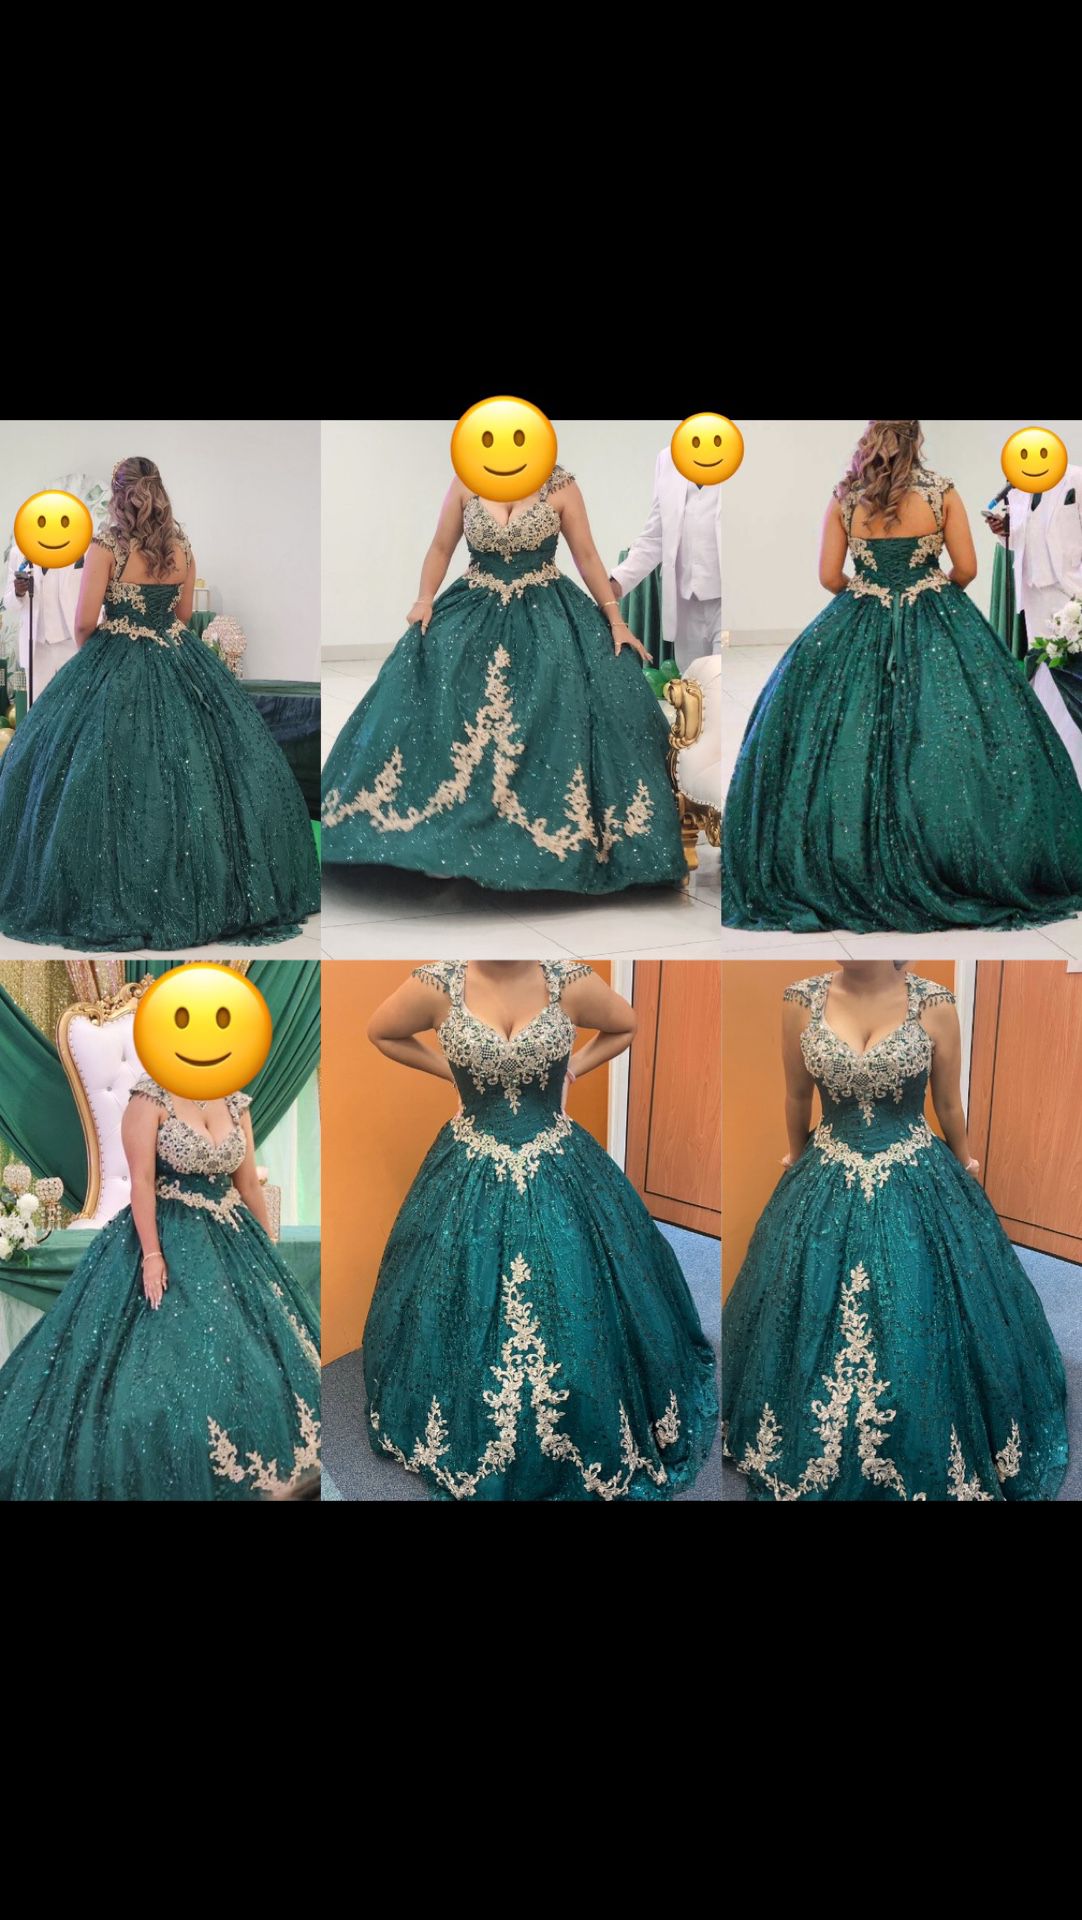 Emerald green & gold sweet 16 dress with petticoat